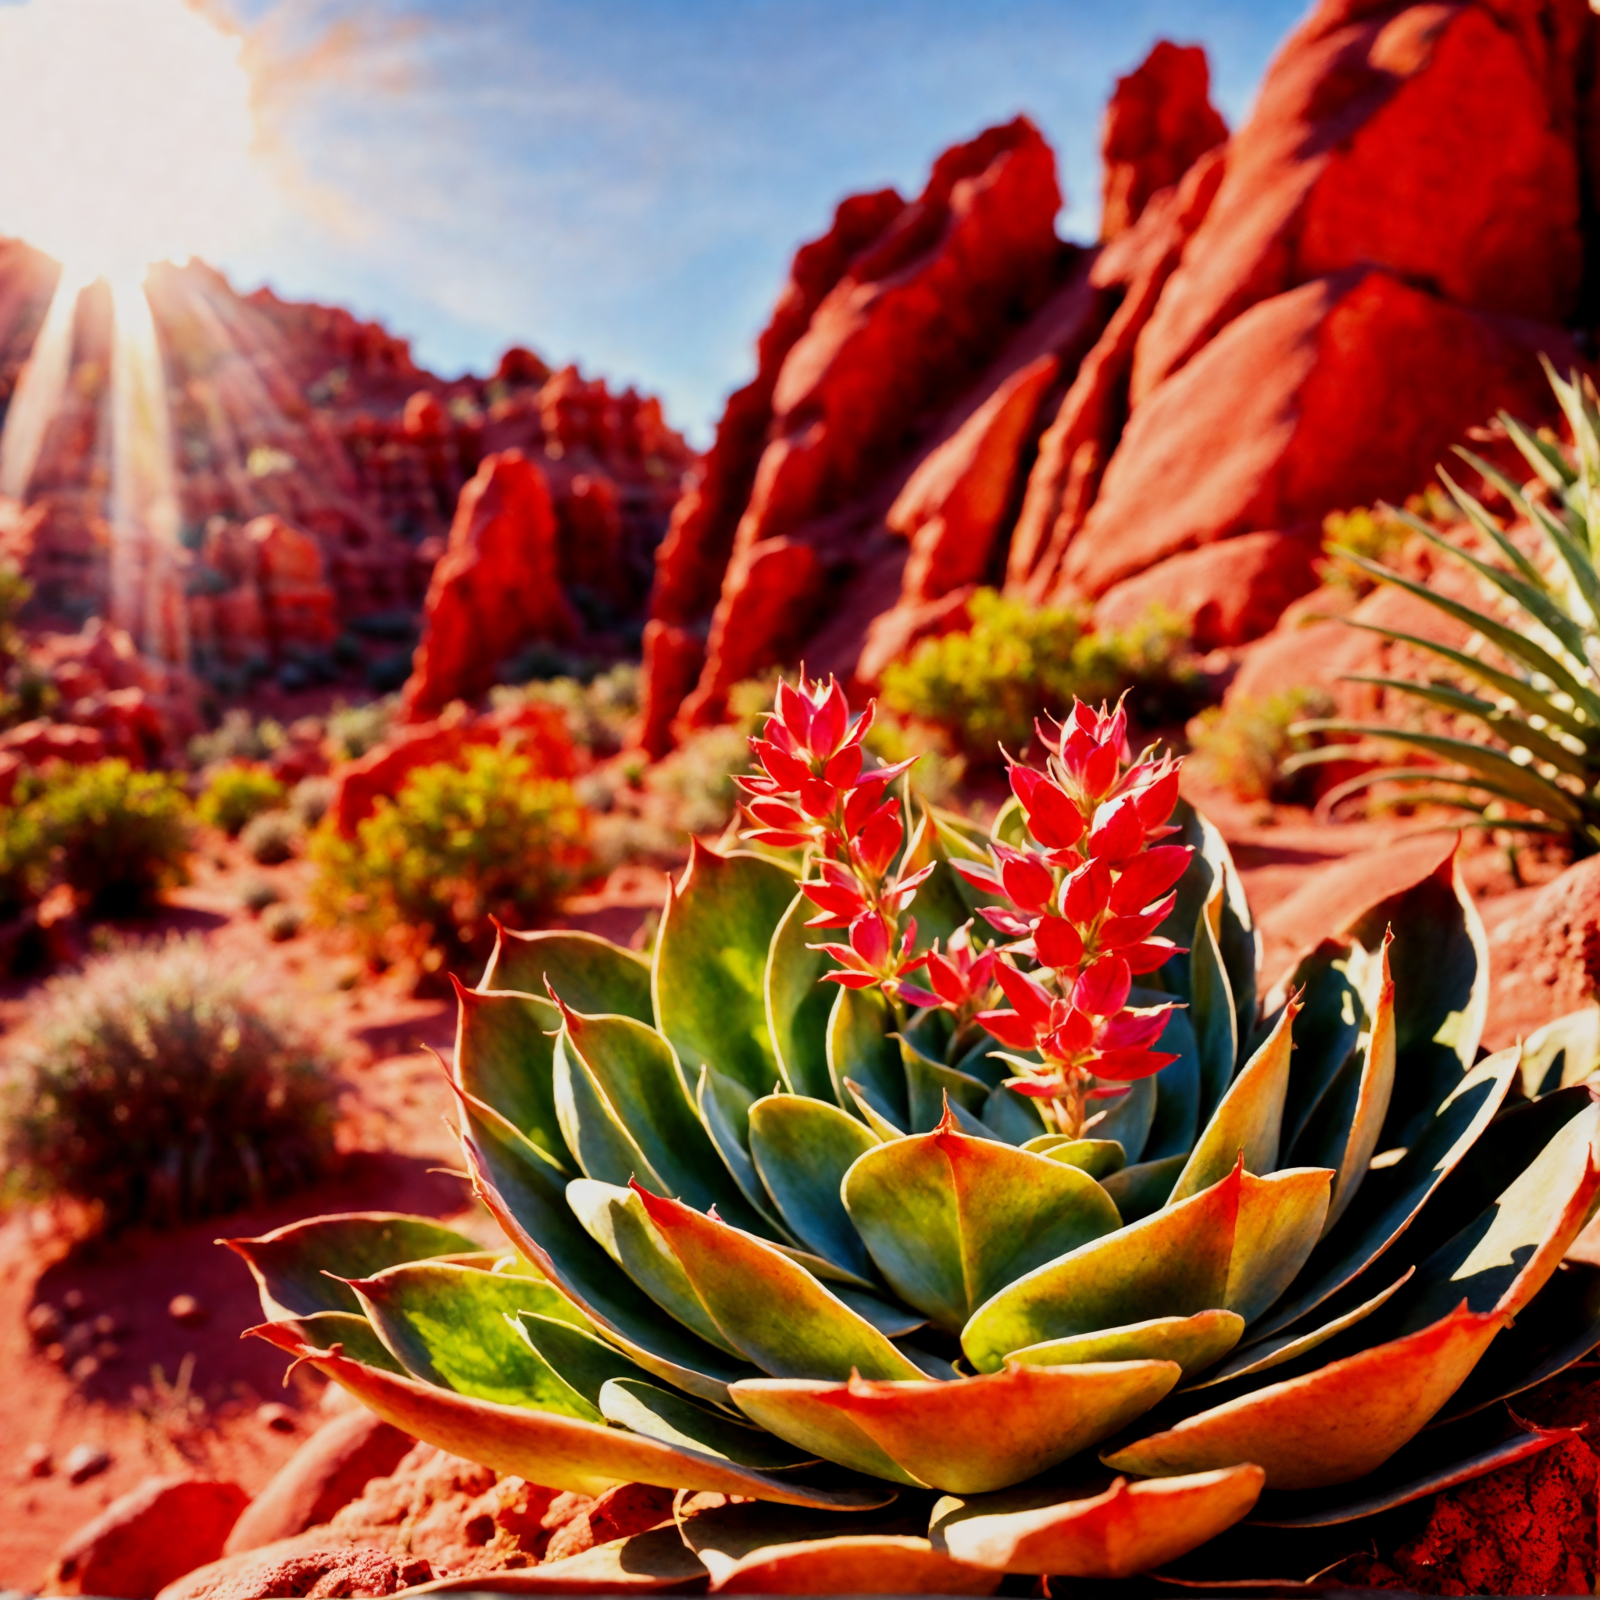 Echeveria secunda amidst desert flora, bright sunlight, with red rock mountains in the background.